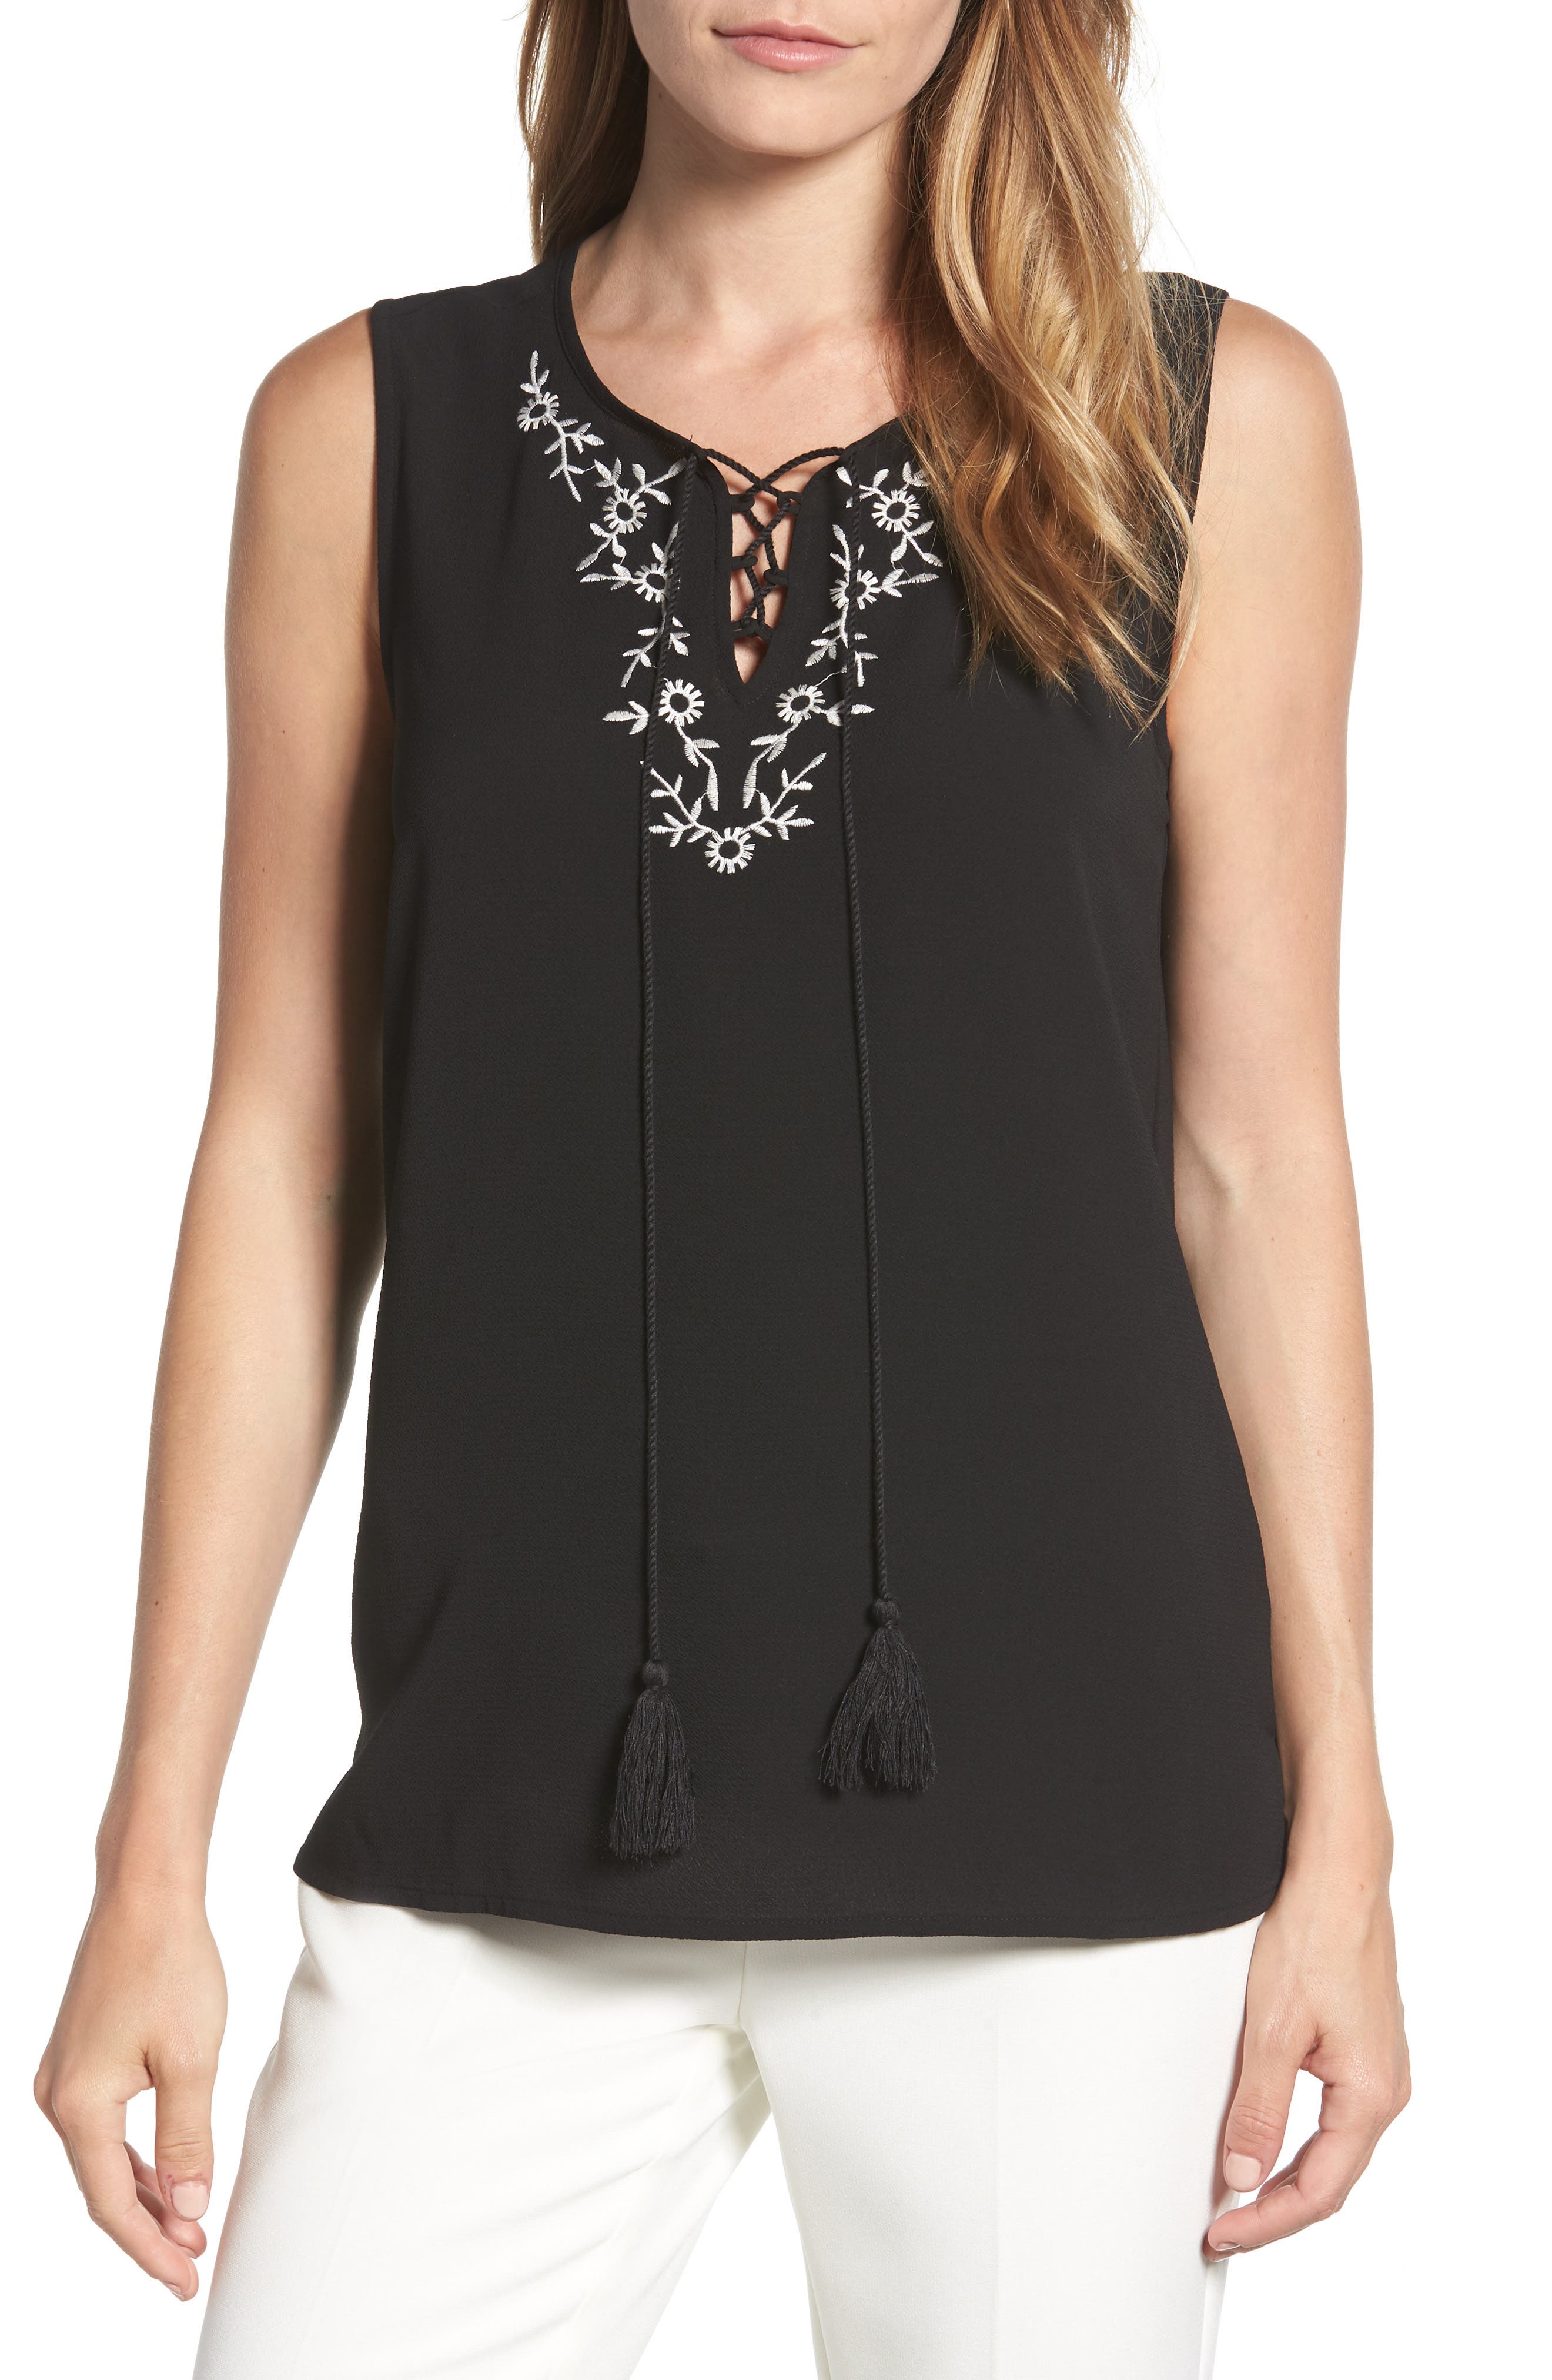 UPC 013803000061 product image for Women's Chaus Embroidered Sleeveless Blouse | upcitemdb.com